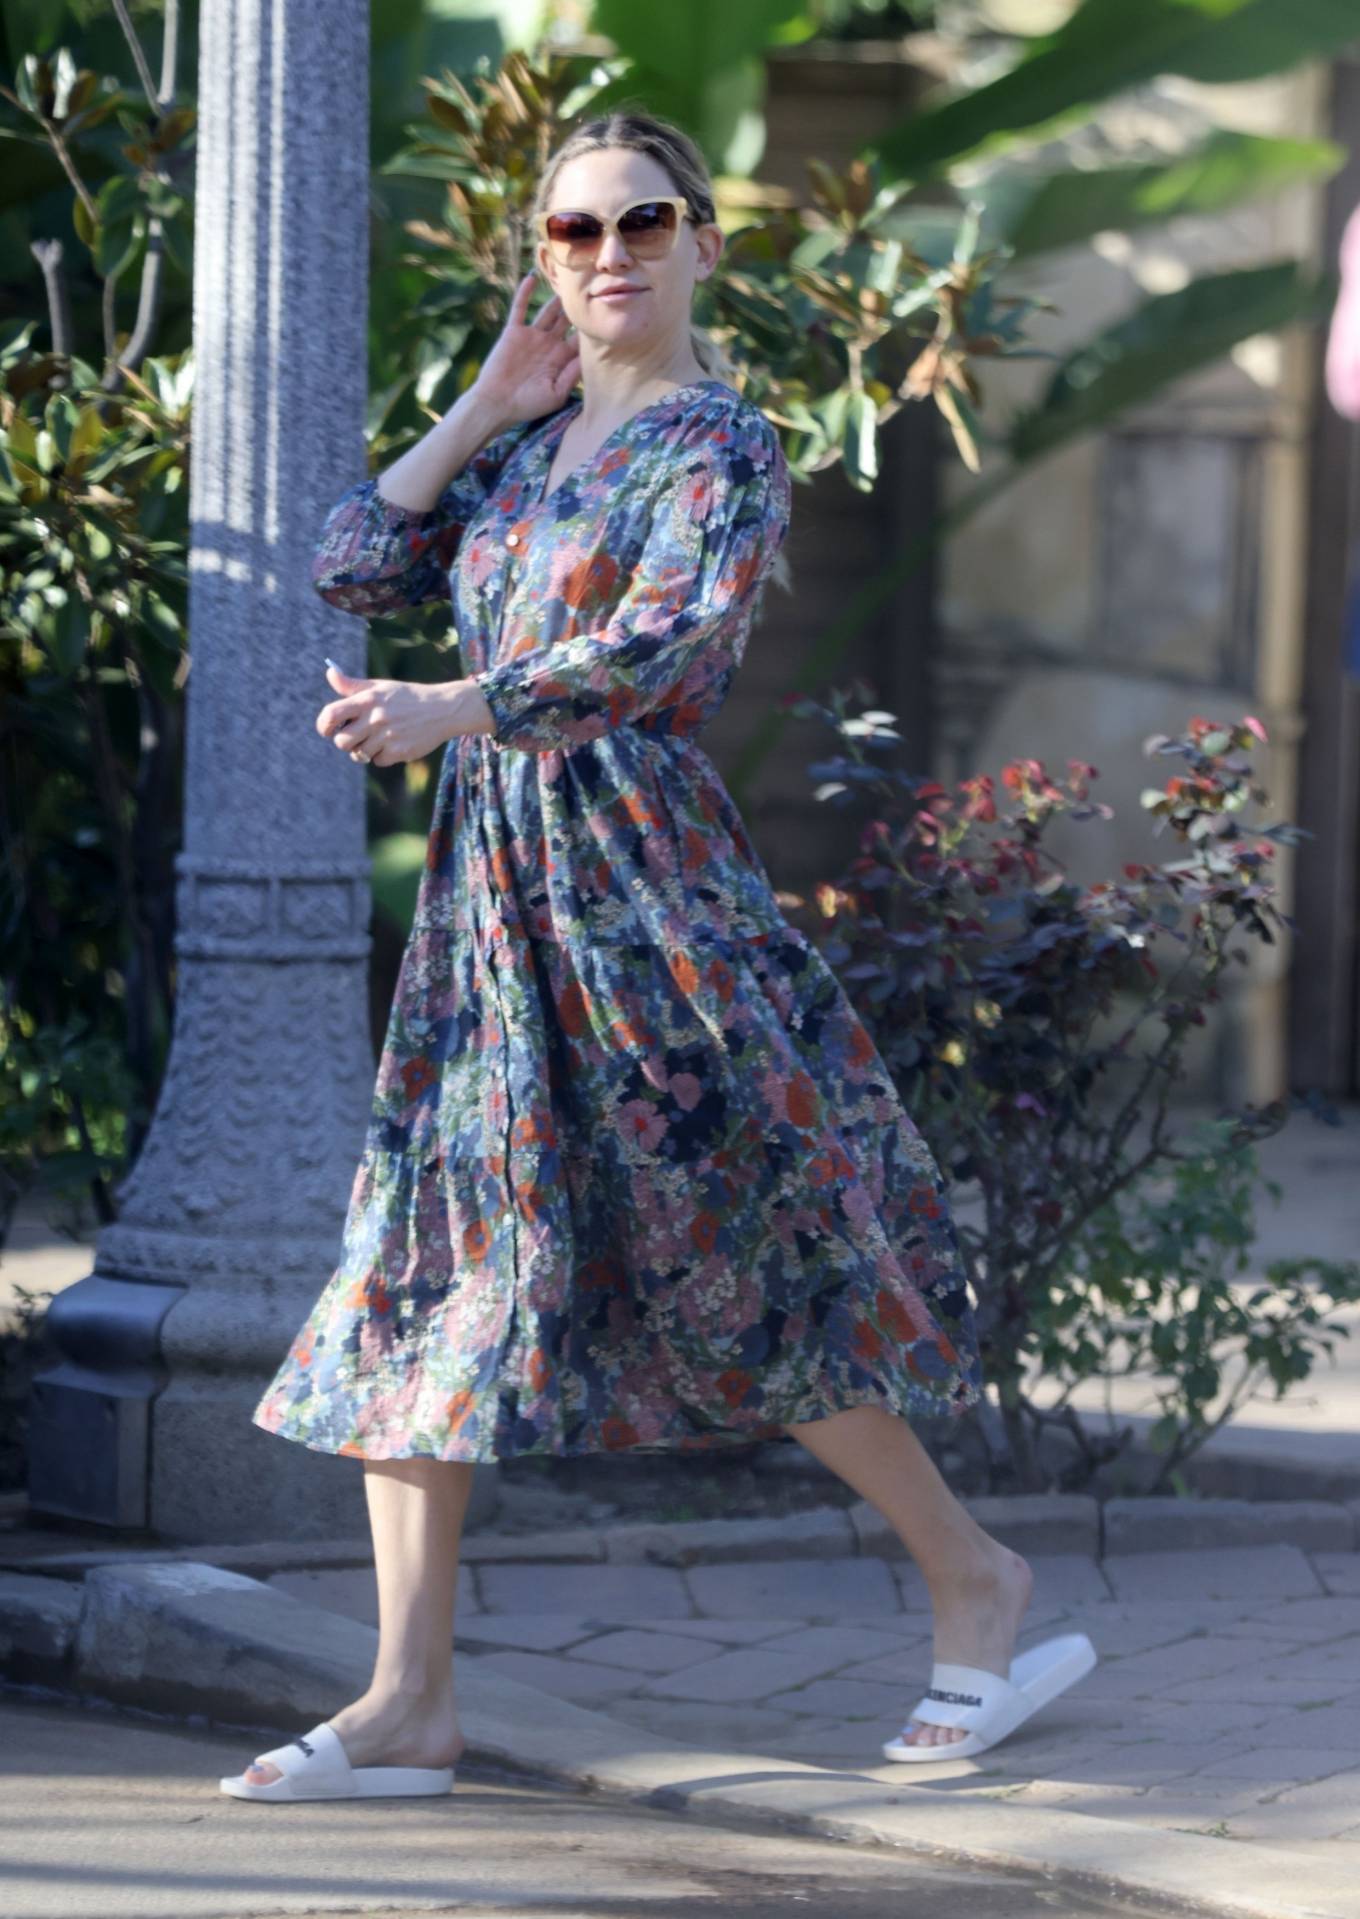 Kate Hudson 2022 : Kate Hudson – Wears a flower dress while out in Los Angeles-06